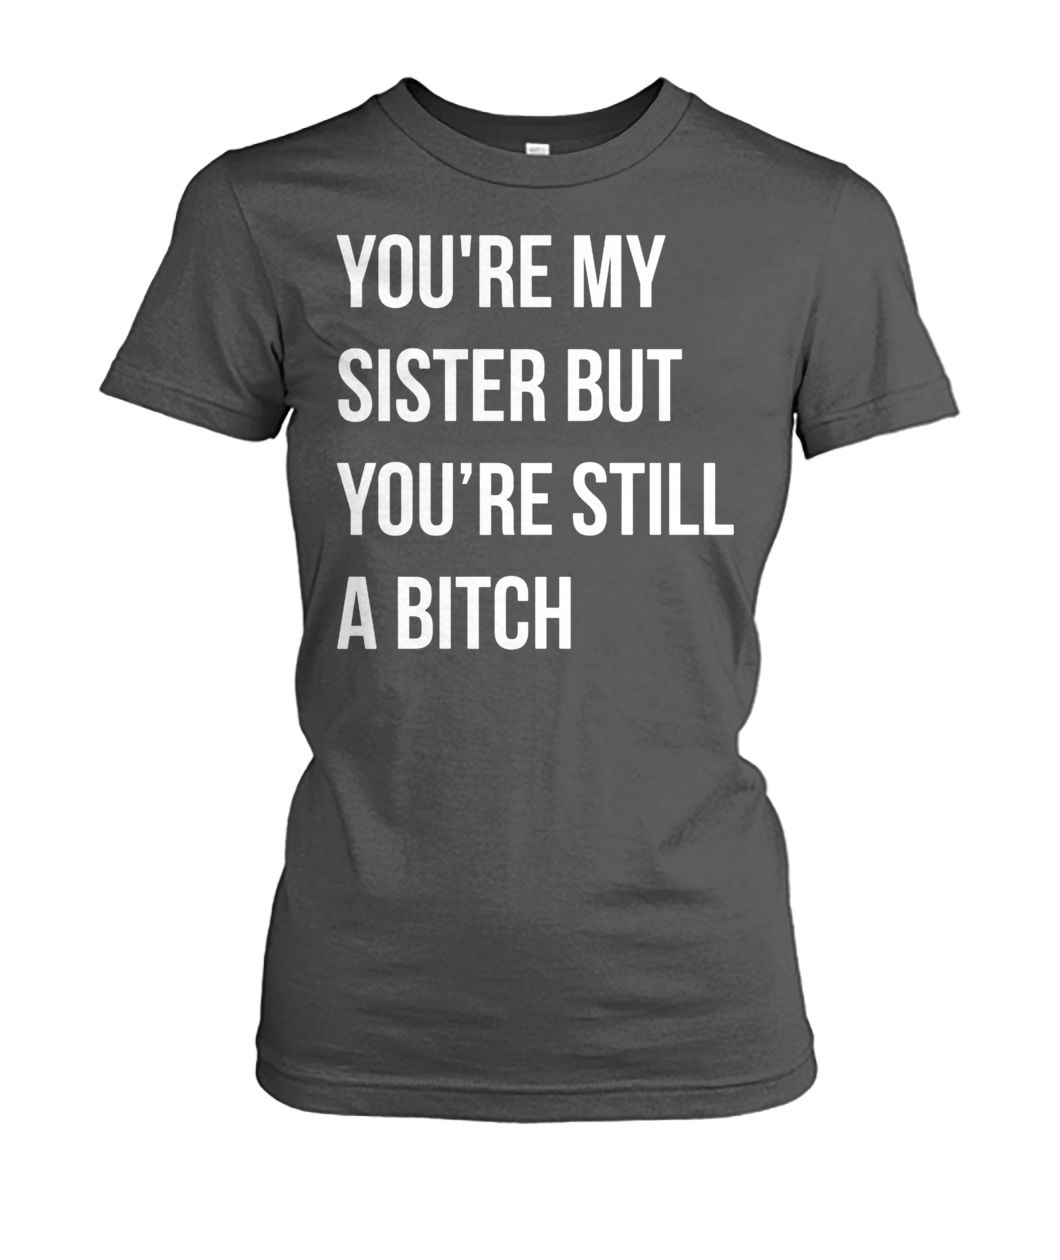 You're my sister but you're still a bitch women's crew tee